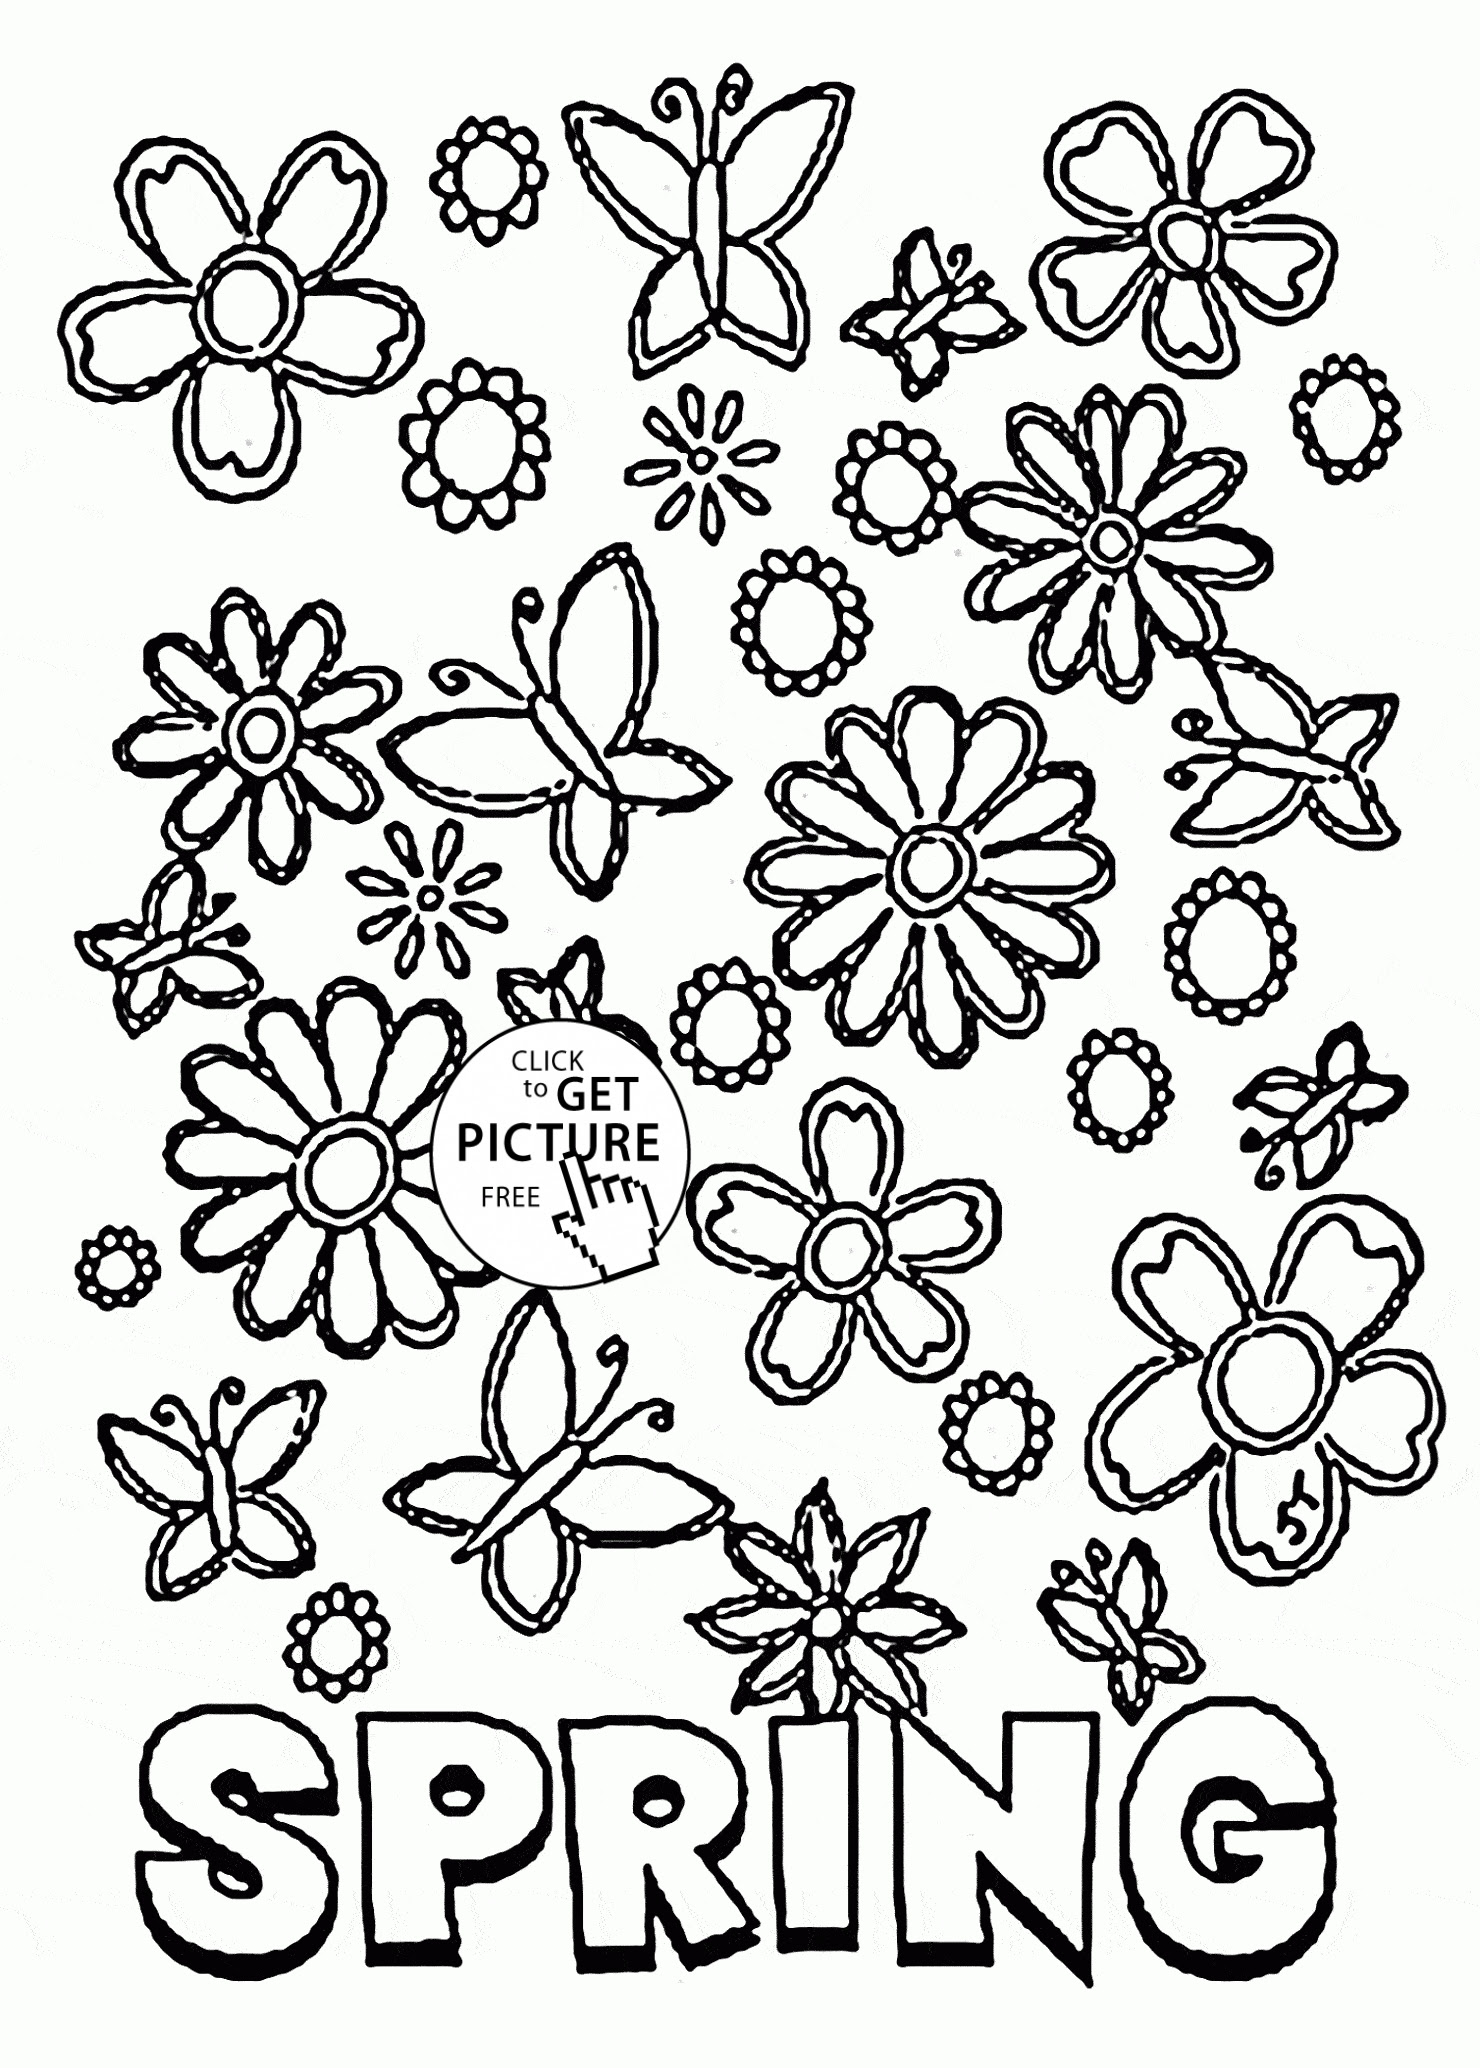 spring-coloring-sheets-free-printable-spring-coloring-pages-getcoloringpages-com